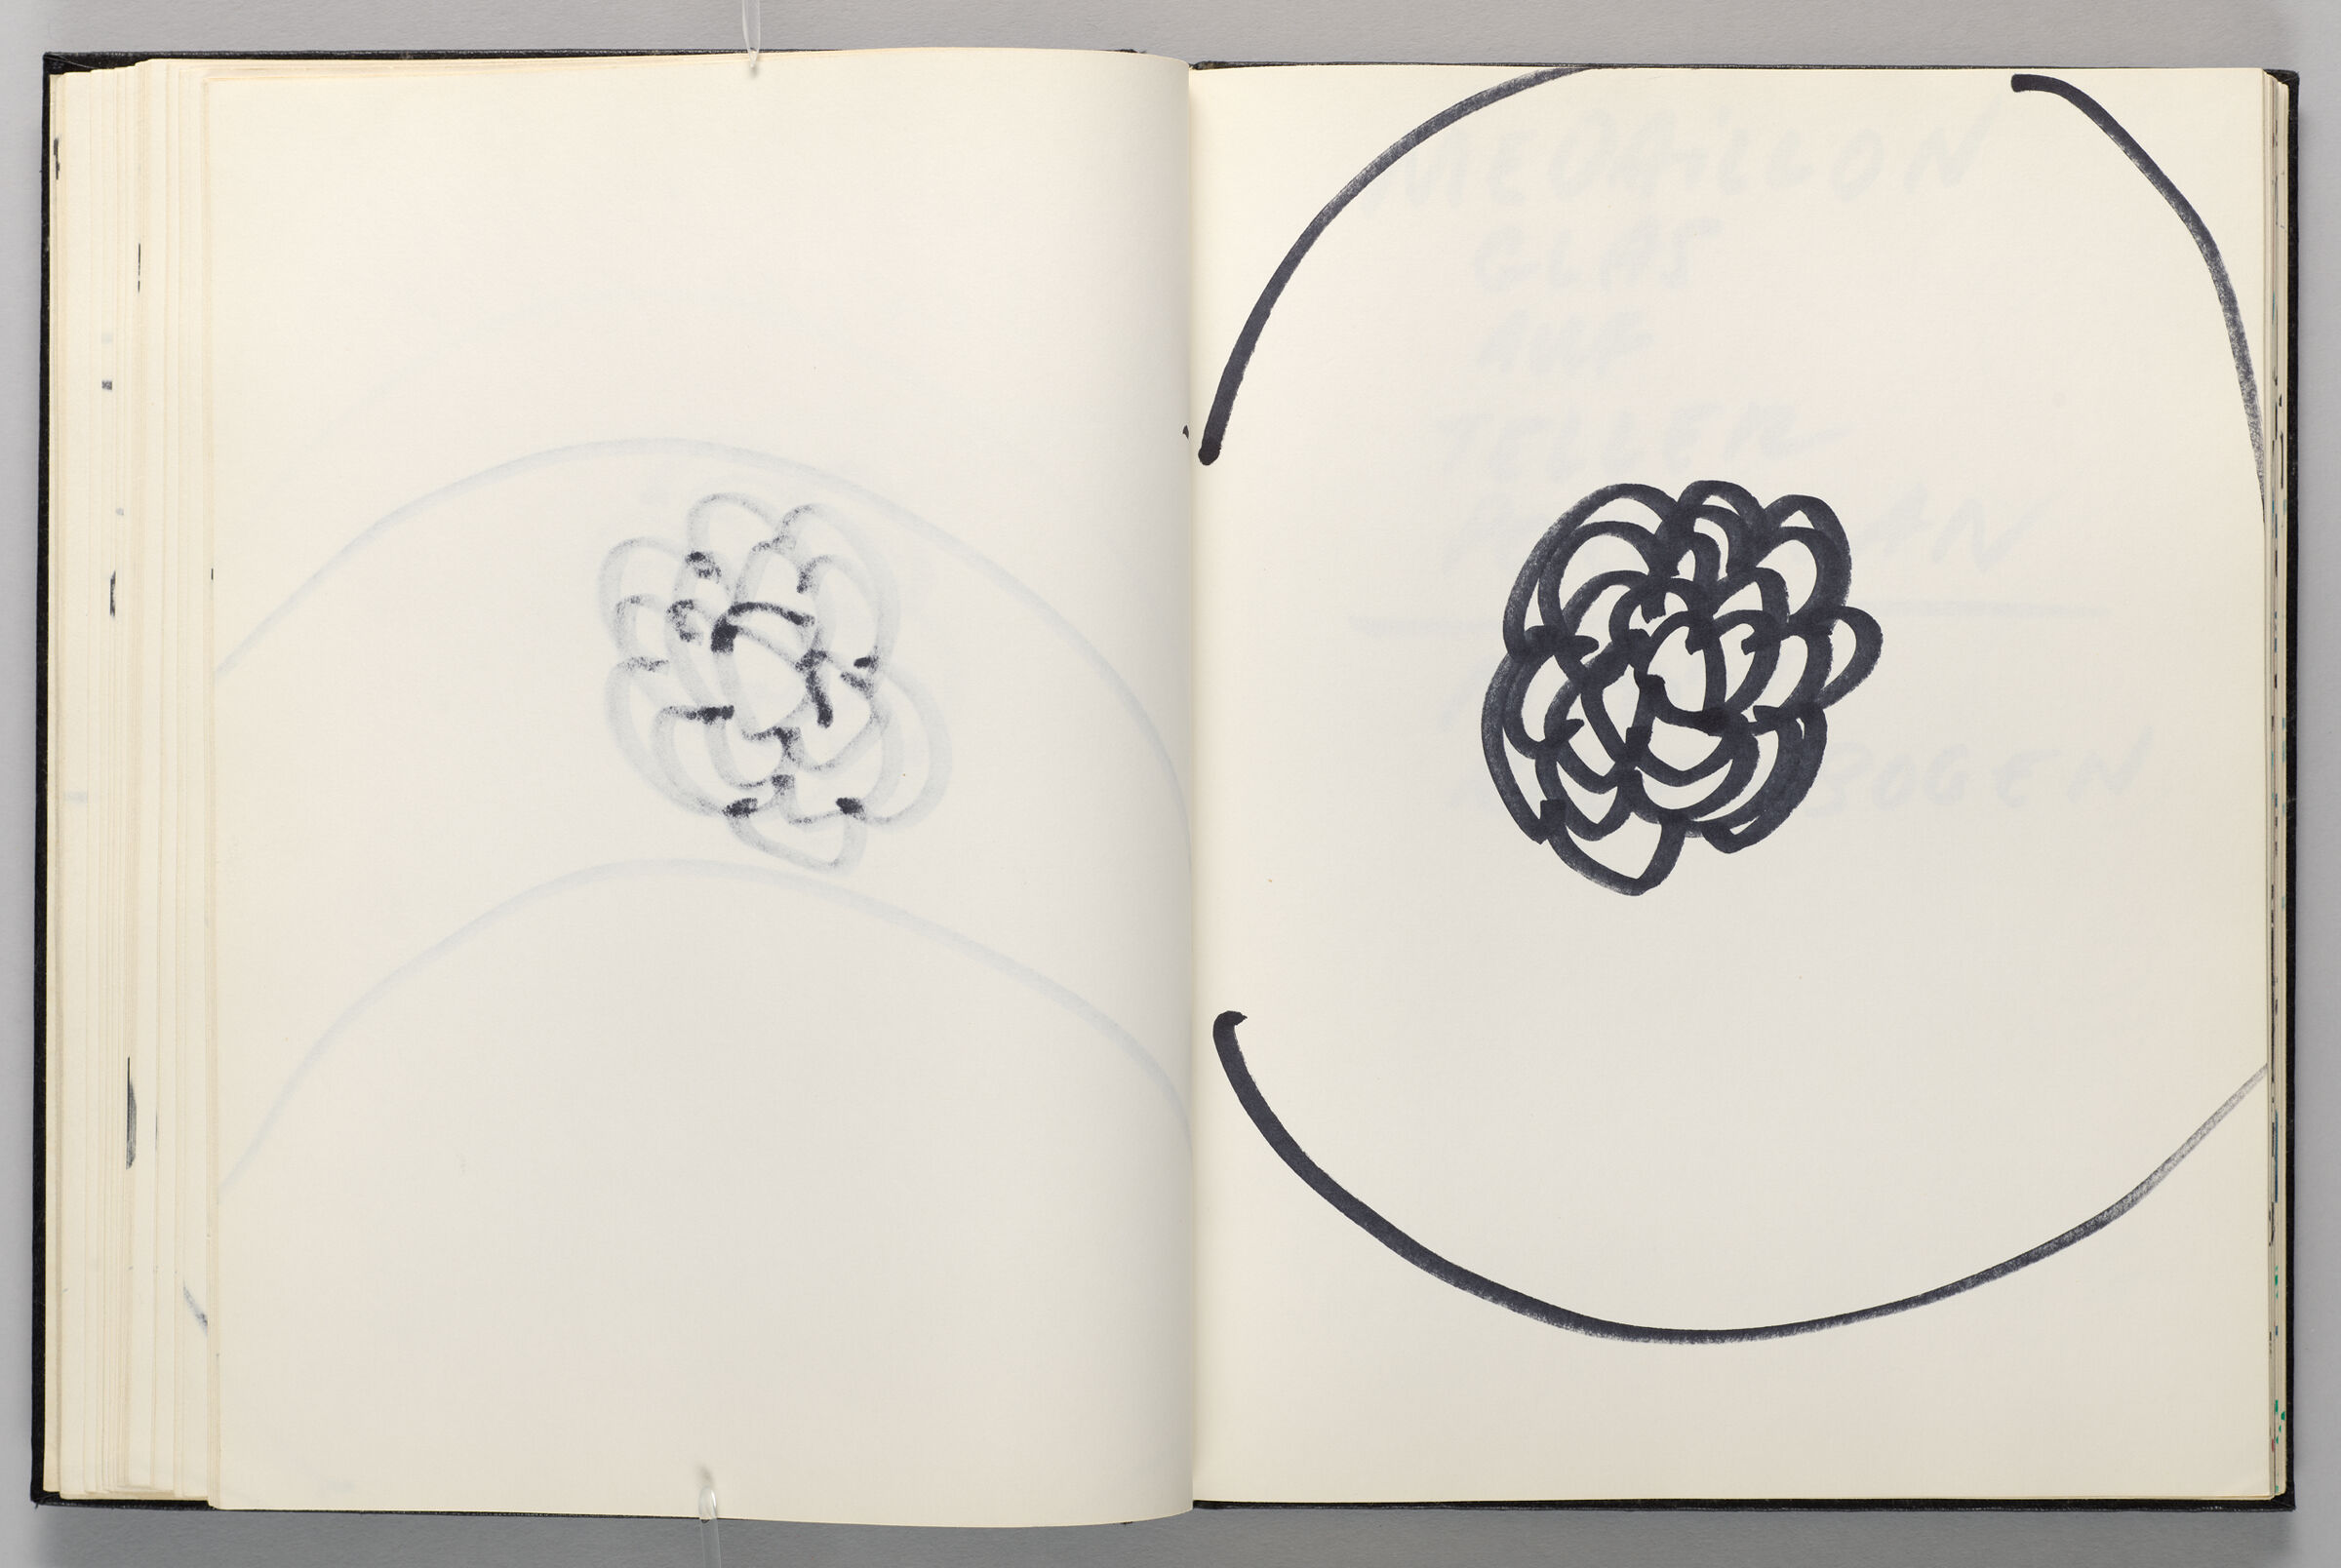 Untitled (Bleed-Through Of Previous Page, Left Page); Untitled (Porcelain Design, Right Page)